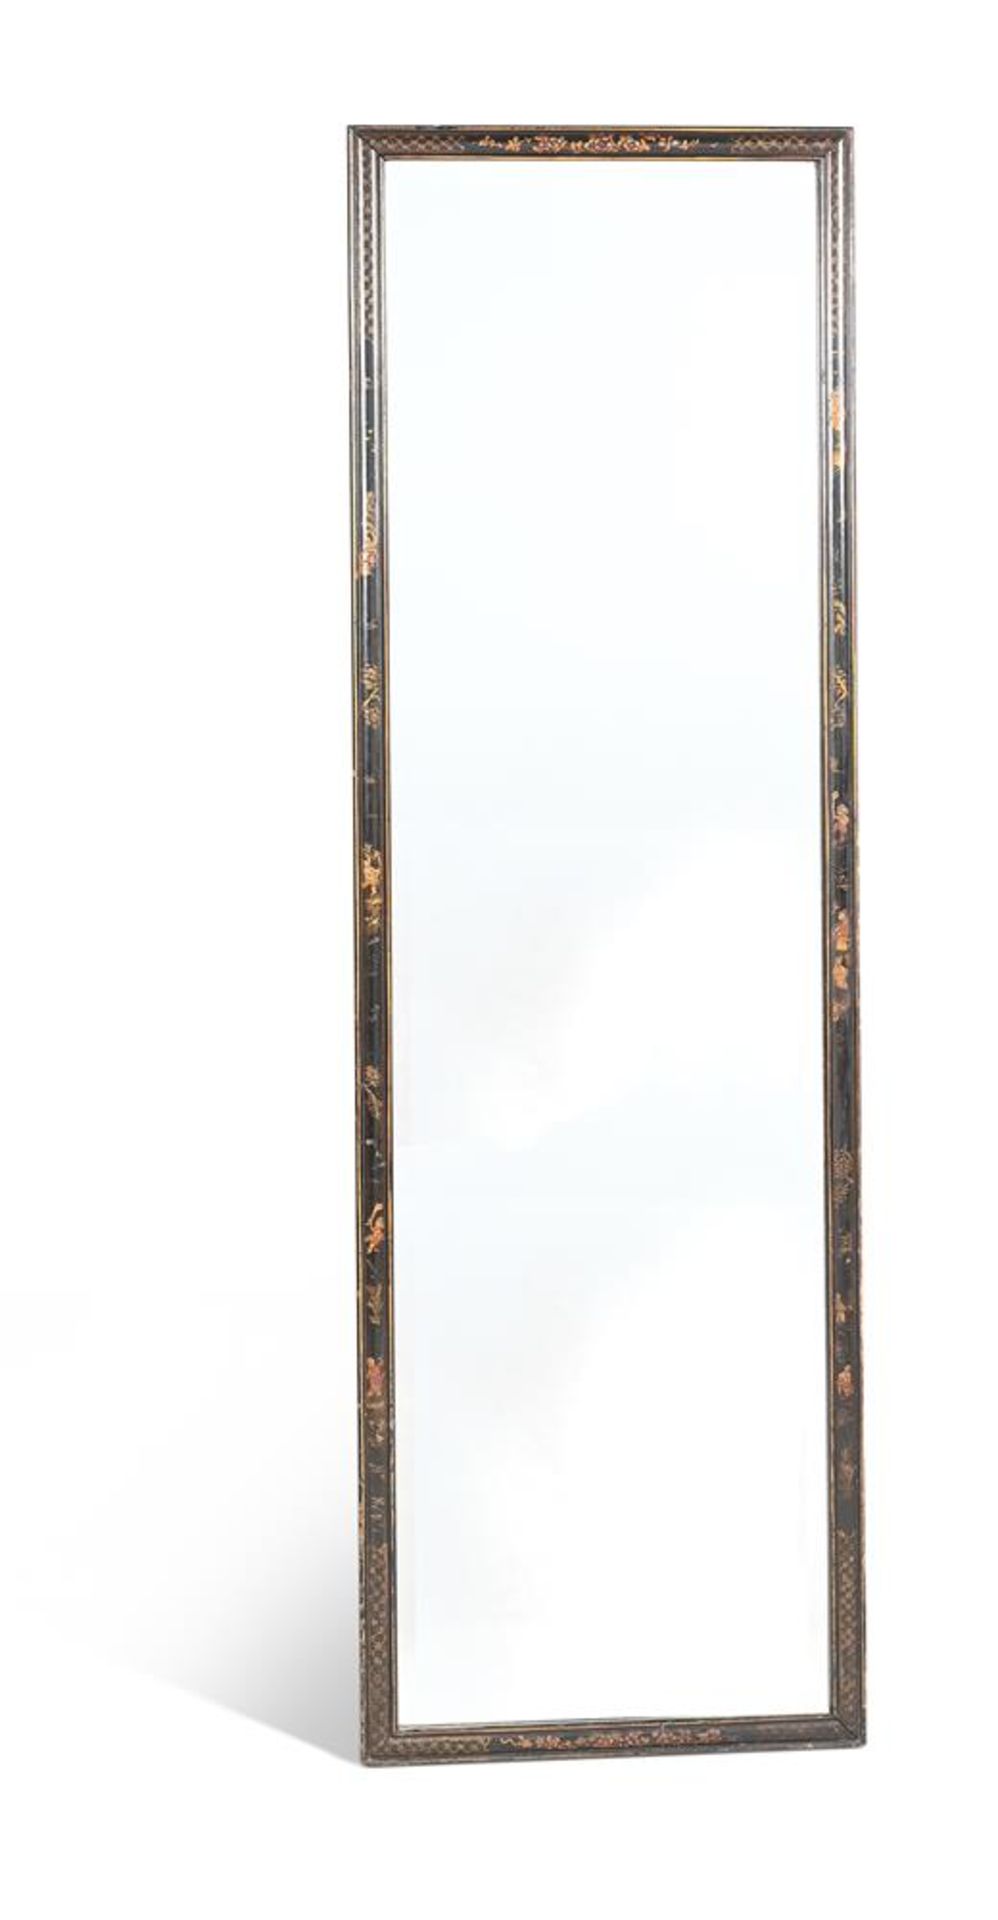 PAIR OF BLACK AND GILT CHINOISERIE DECORATED WALL MIRRORS, EARLY 20TH CENTURY - Image 3 of 3